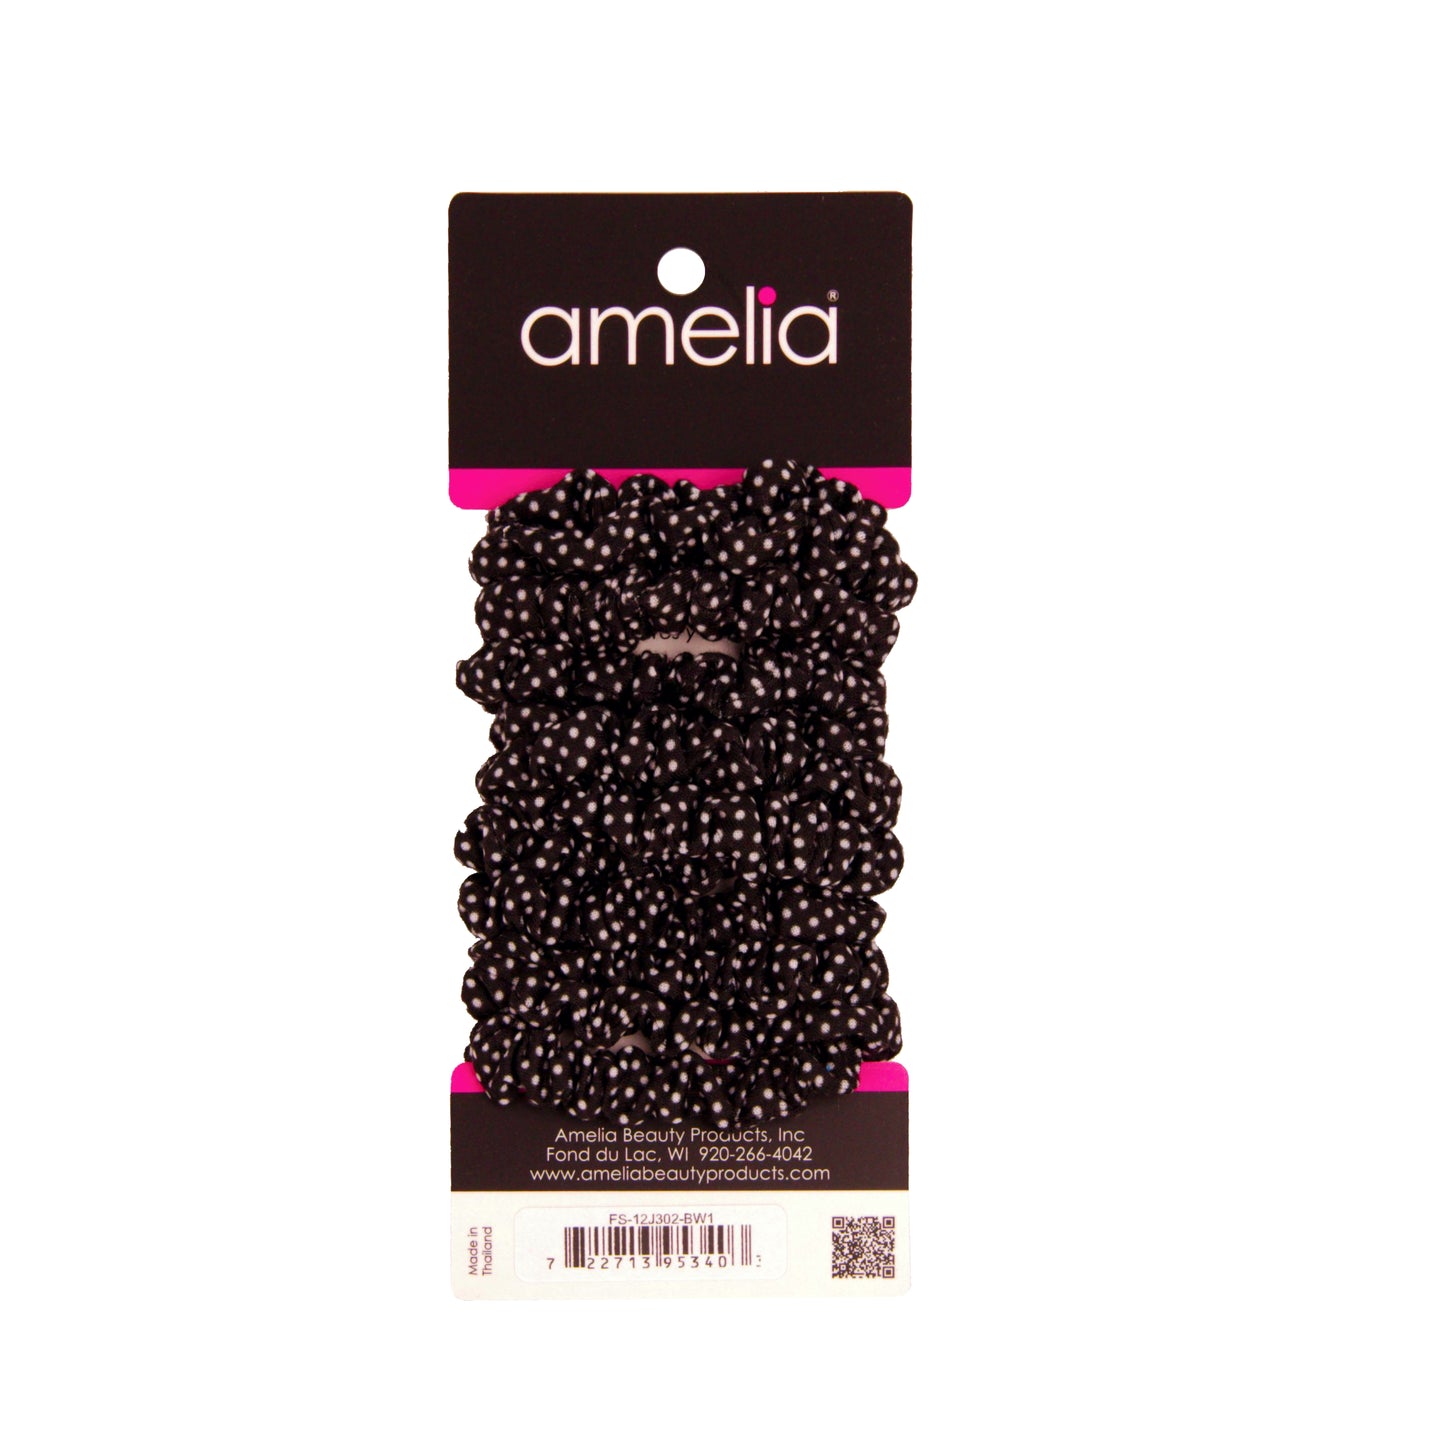 Amelia Beauty, Black/White Polka Dot Jersey Scrunchies, 2.25in Diameter, Gentle on Hair, Strong Hold, No Snag, No Dents or Creases. 12 Pack